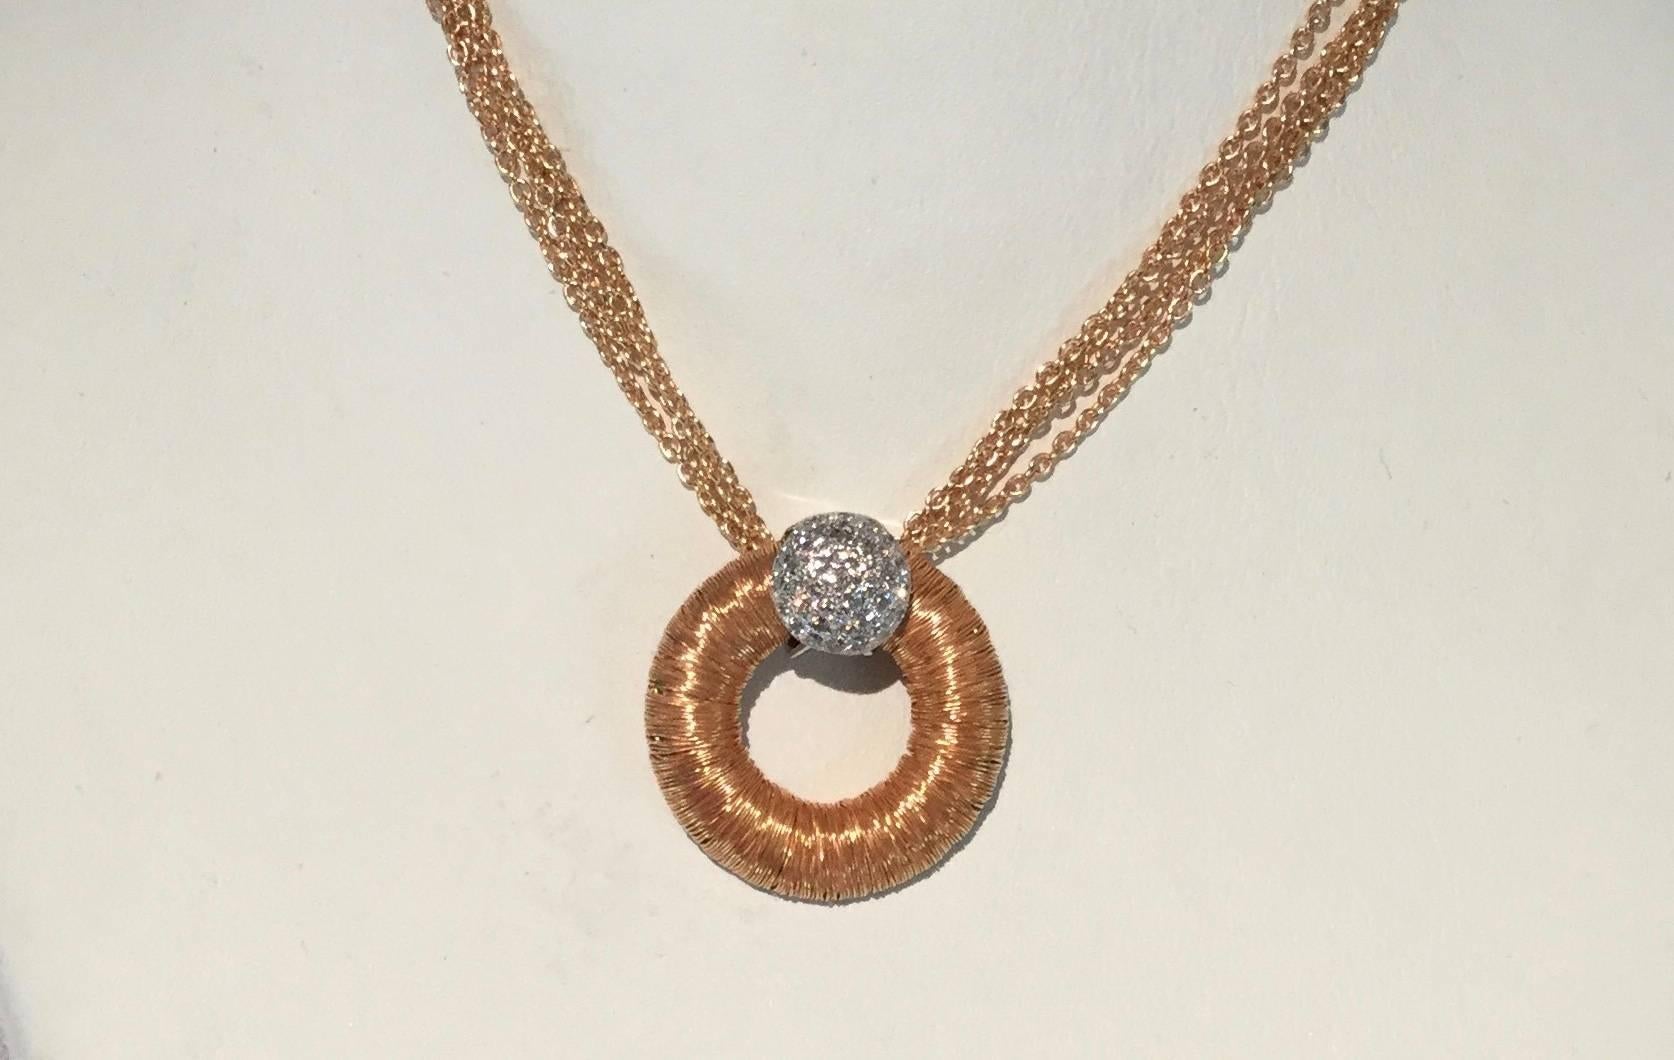 18K rose gold wire wrap circle with white gold diamond pave set accent on a 4 strand 18K rose gold chain. The pendant contains 0.15 carat of diamonds and the necklace weighs 11.5 grams.